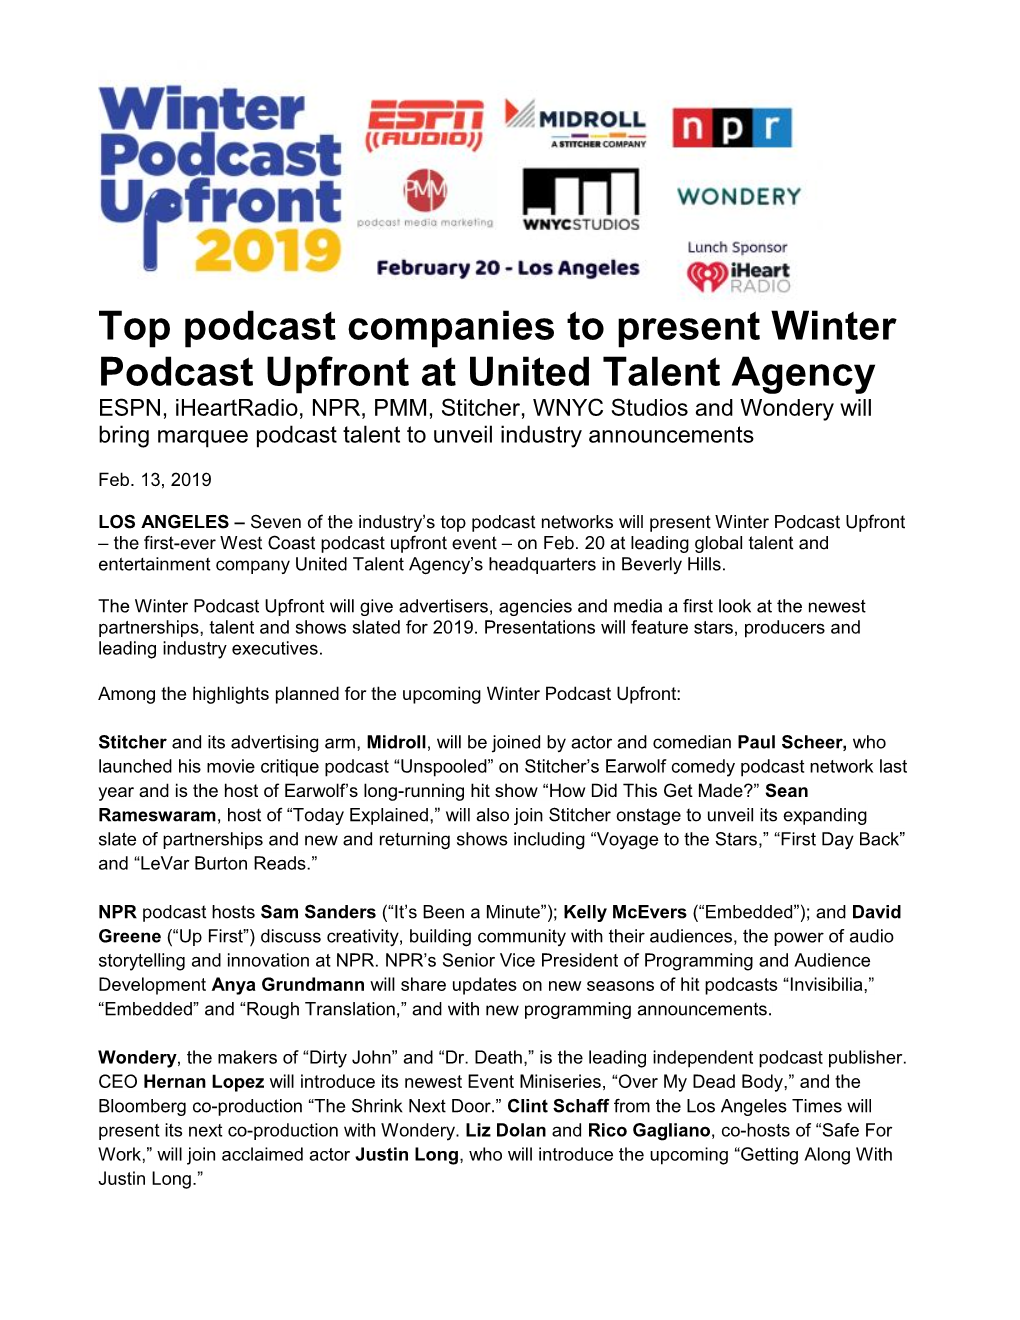 Top Podcast Companies to Present Winter Podcast Upfront at United